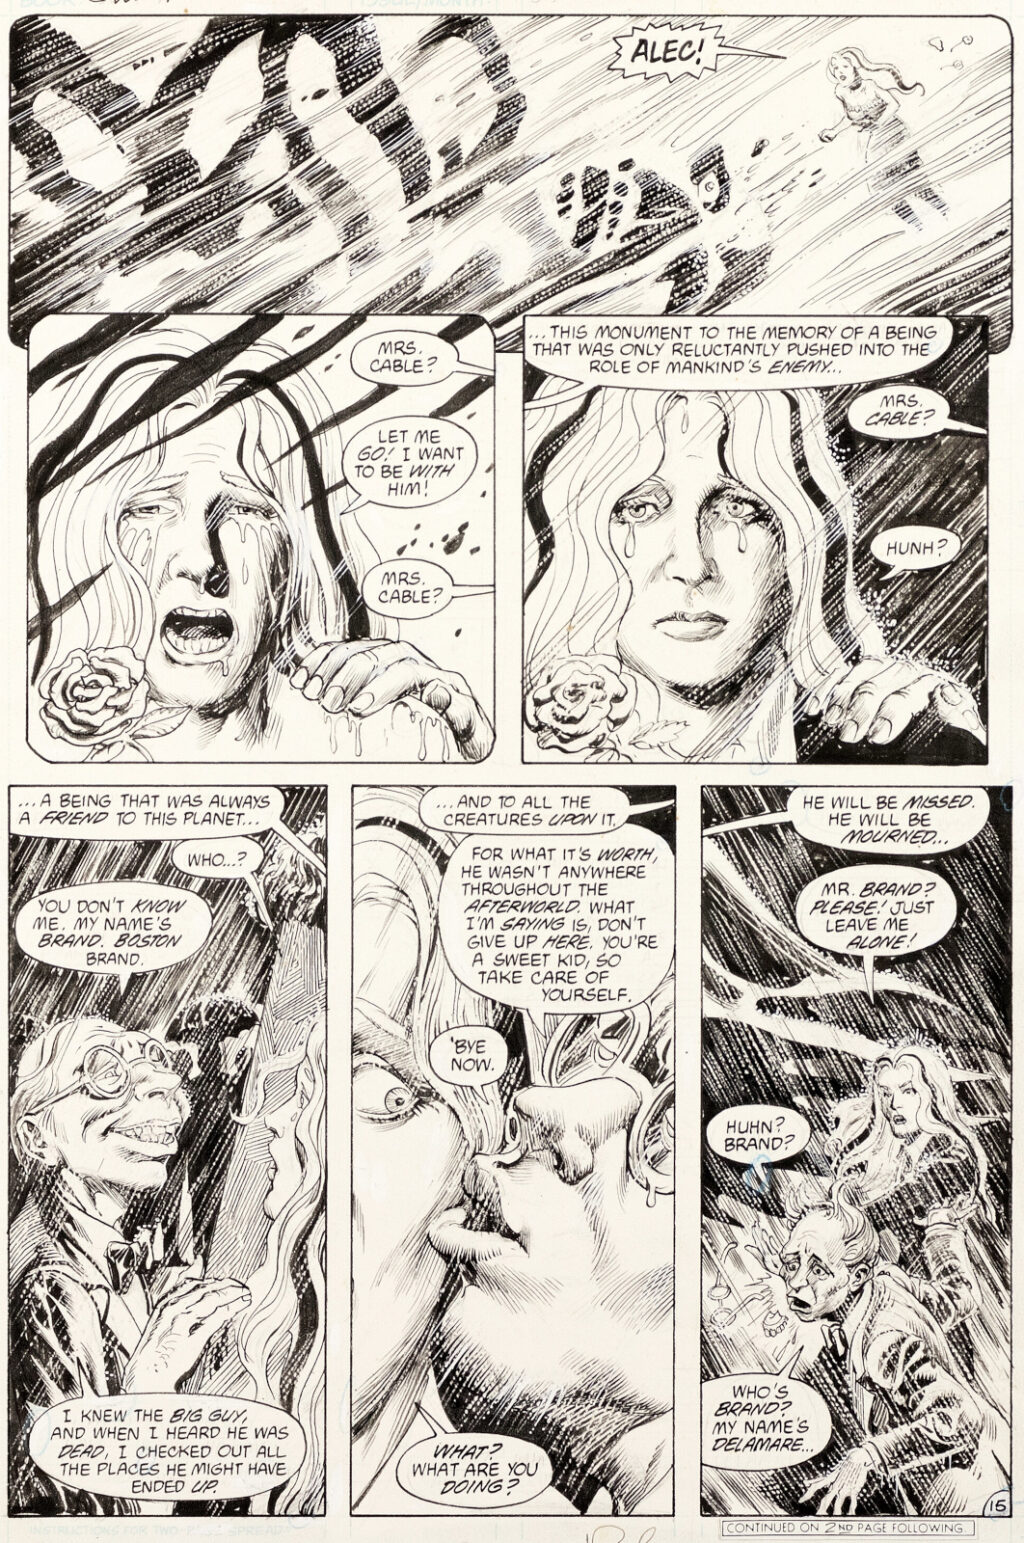 Swamp Thing issue 55 Pages 15 by Rick Veitch and Alfredo Alcala